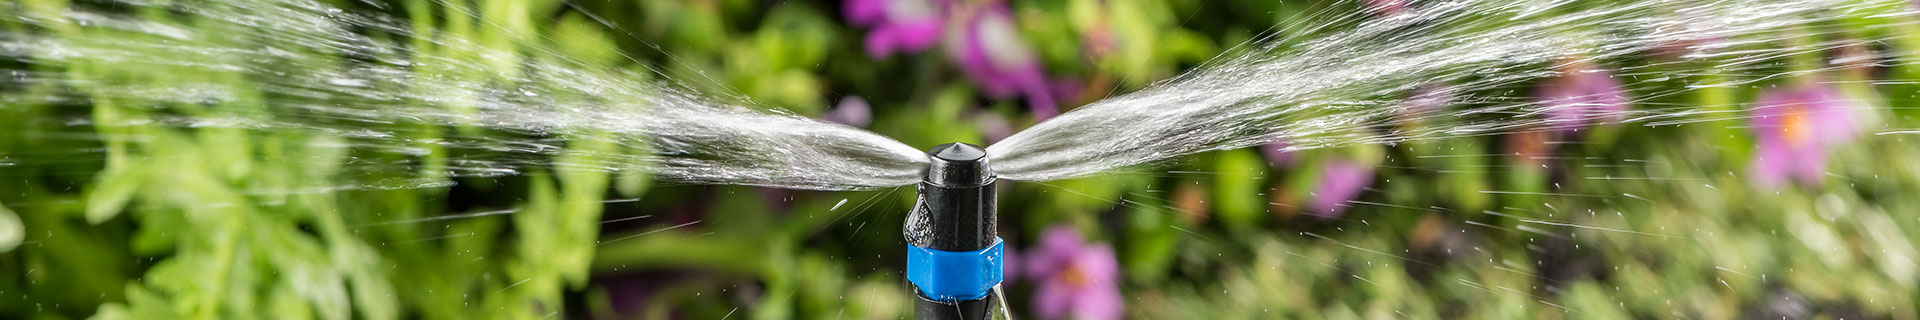 <p>Everything you need to know about drip irrigation systems</p>
